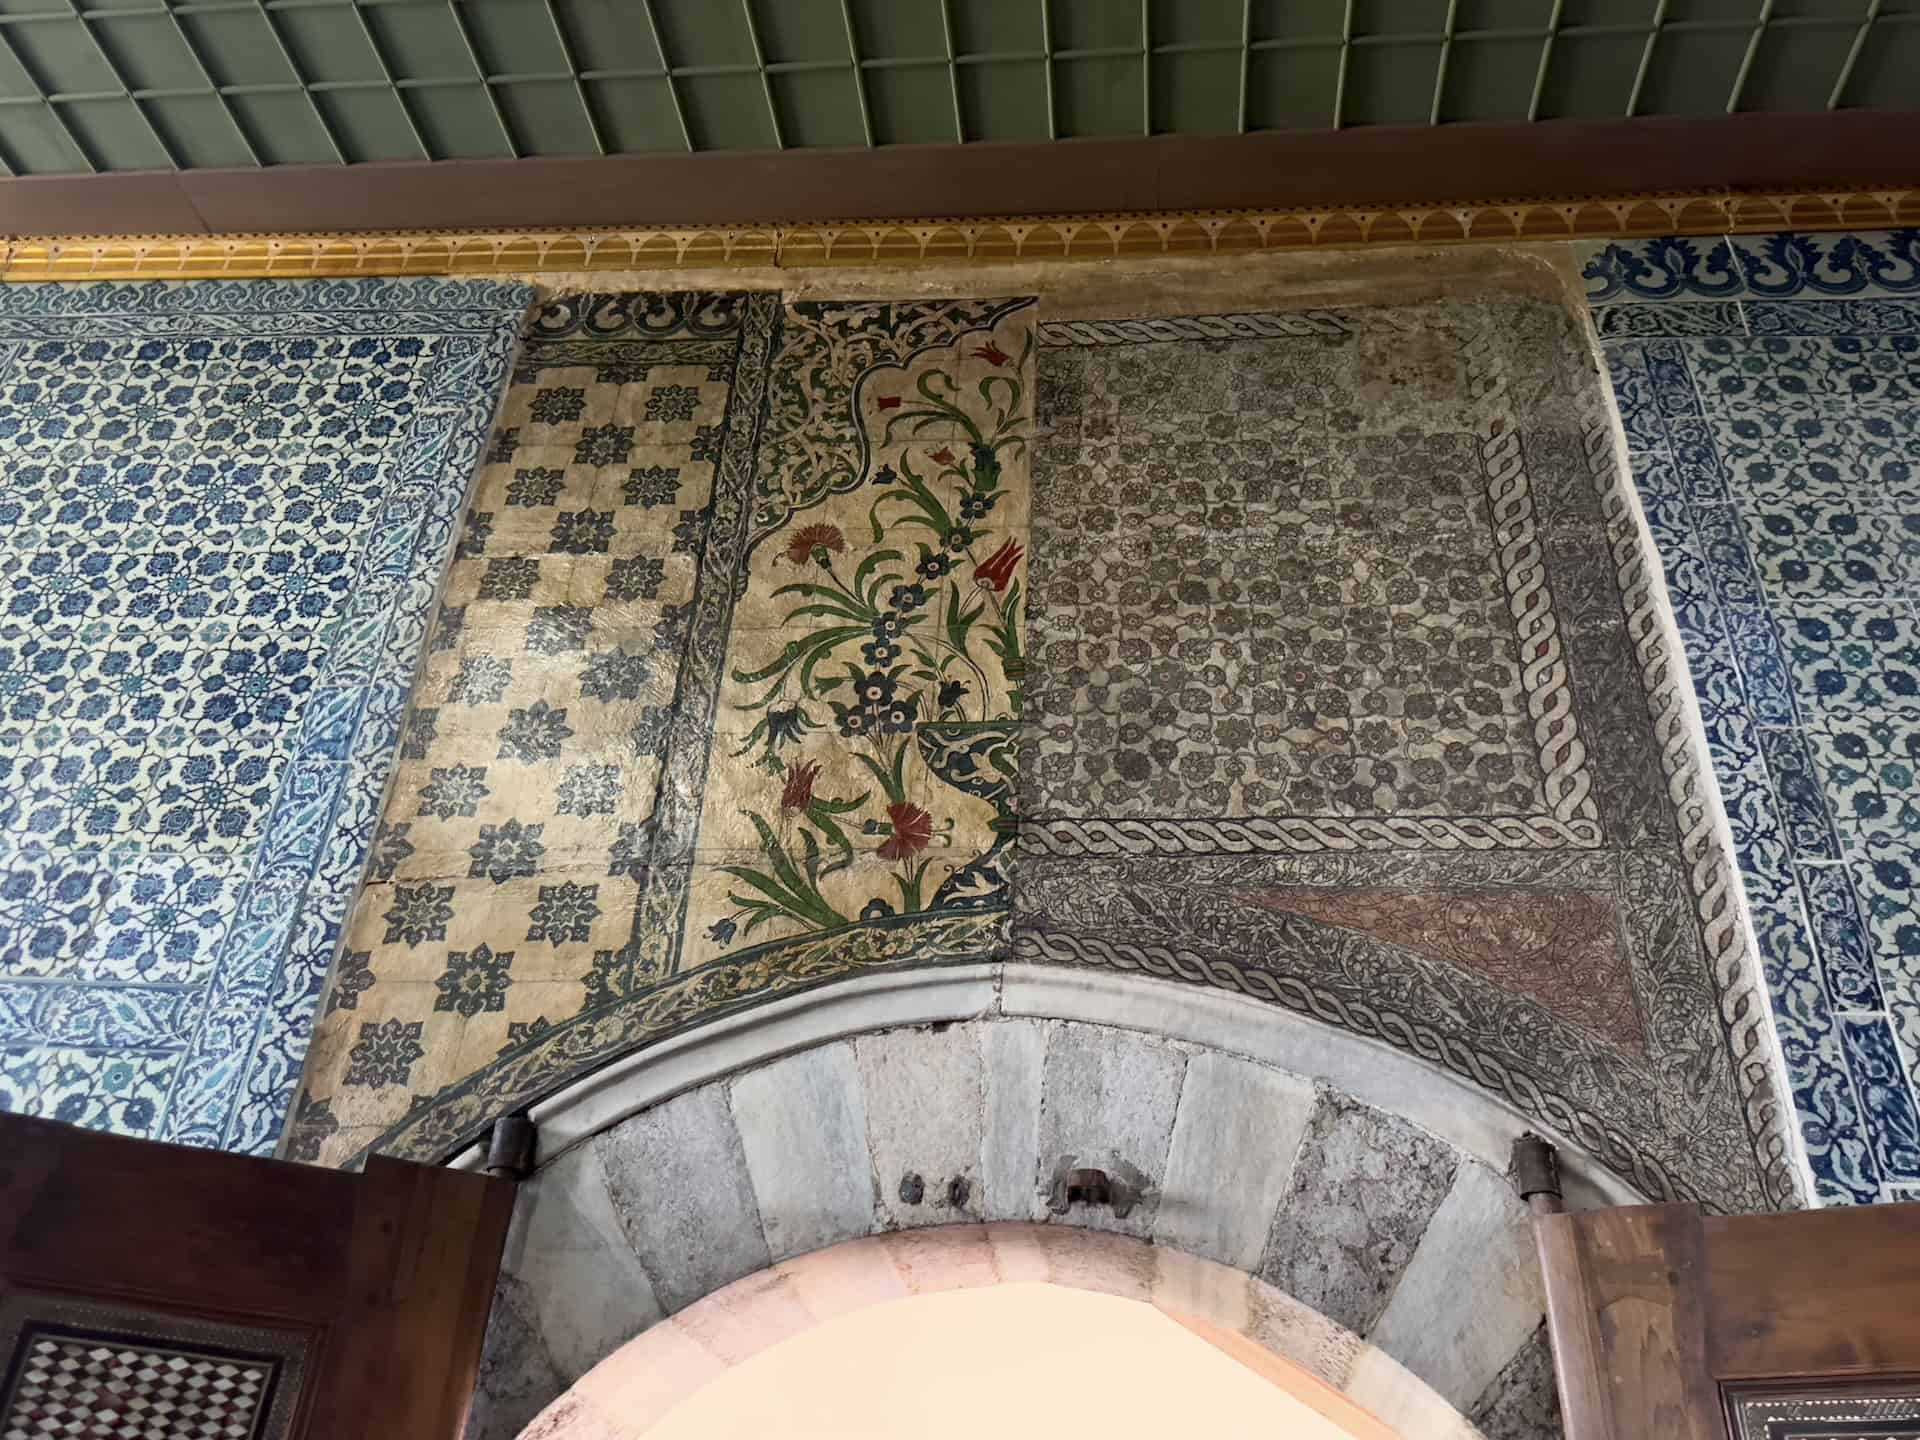 Unrestored tiles at the Sultan's Pavilion